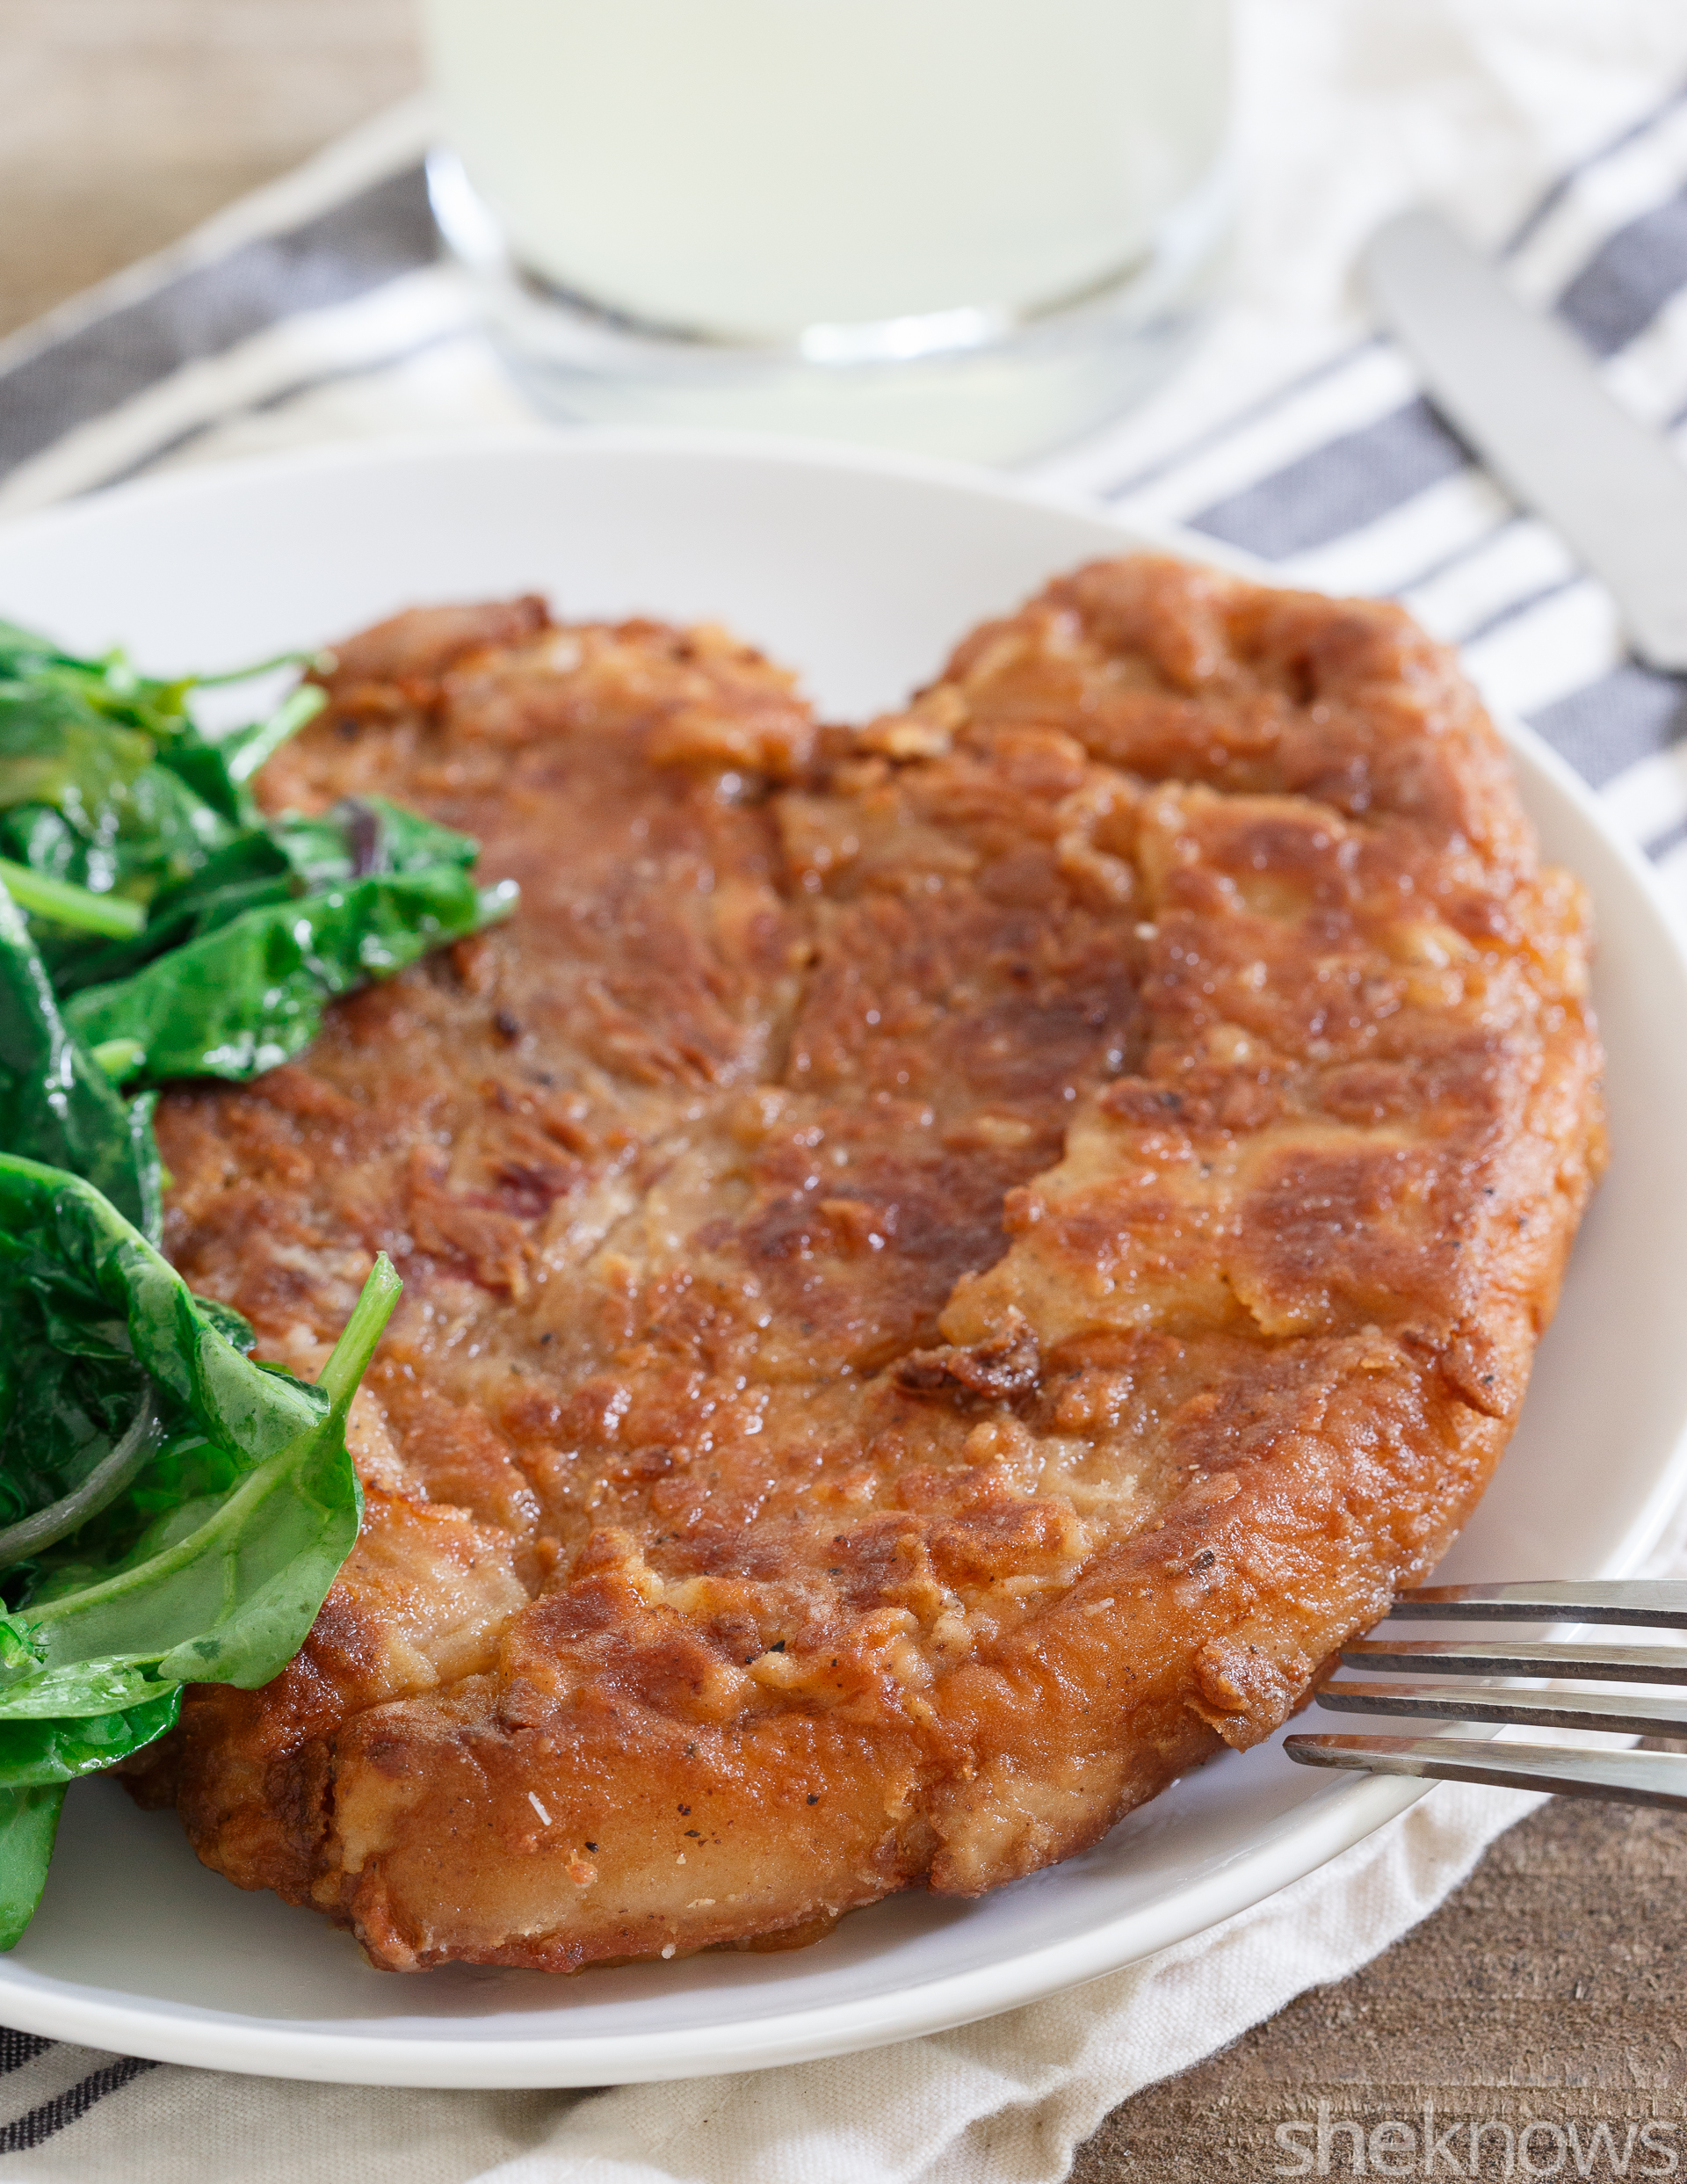 Deep-frying is a pain, but Asian fried pork chops are totally worth it